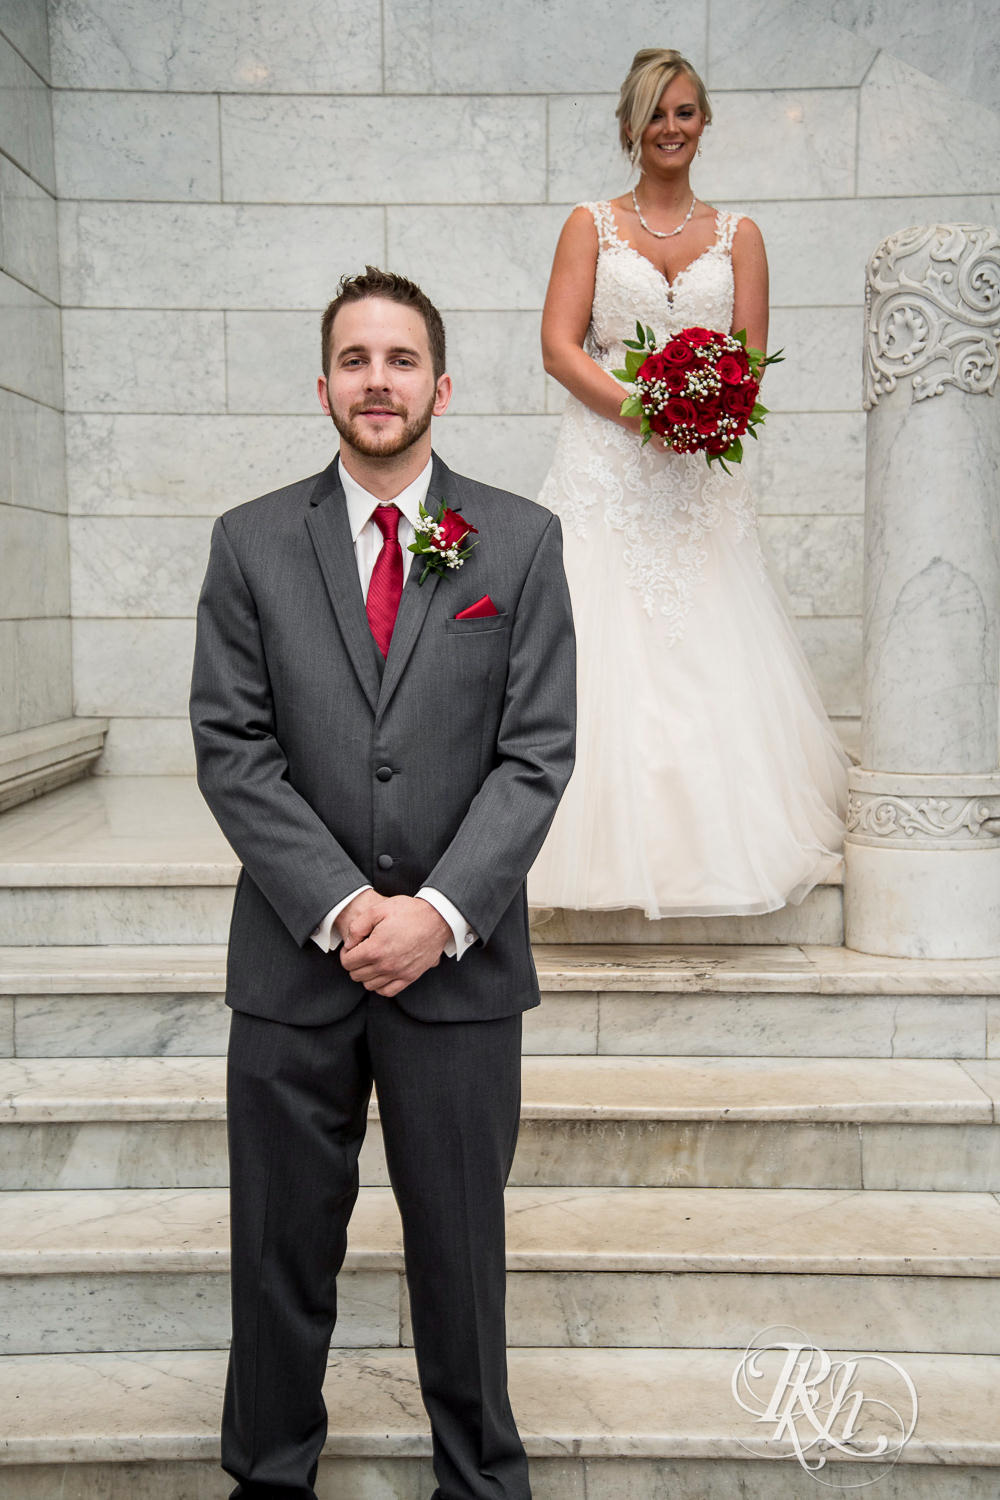 Bride and groom do first look on staircase at Lumber Exchange Event Center in Minneapolis, Minnesota.